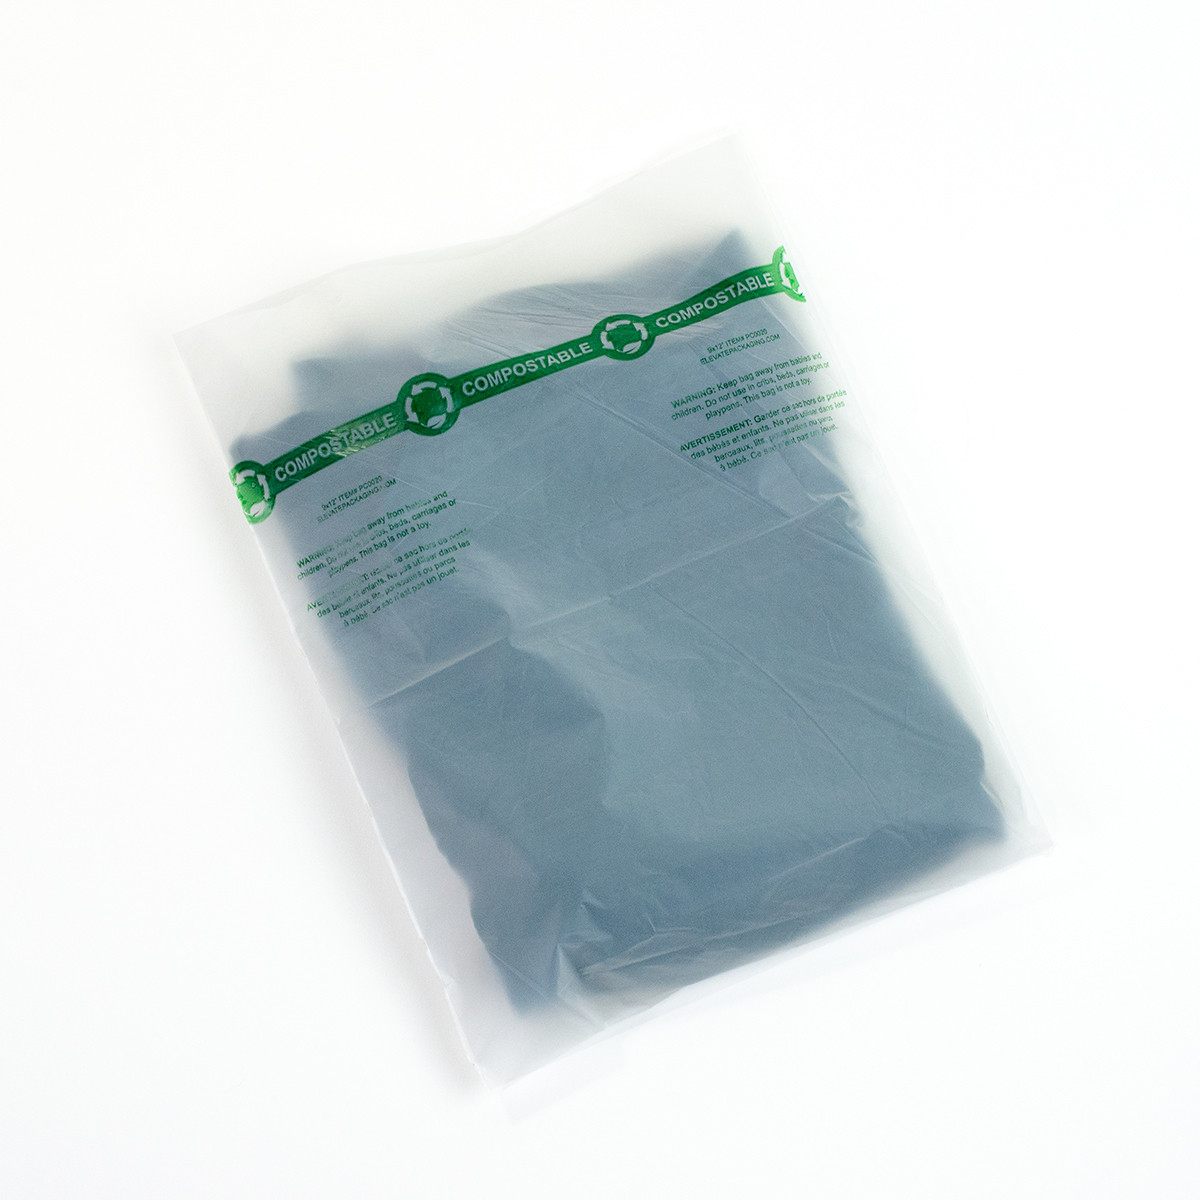 Biodegradable waste bags - With care for our planet